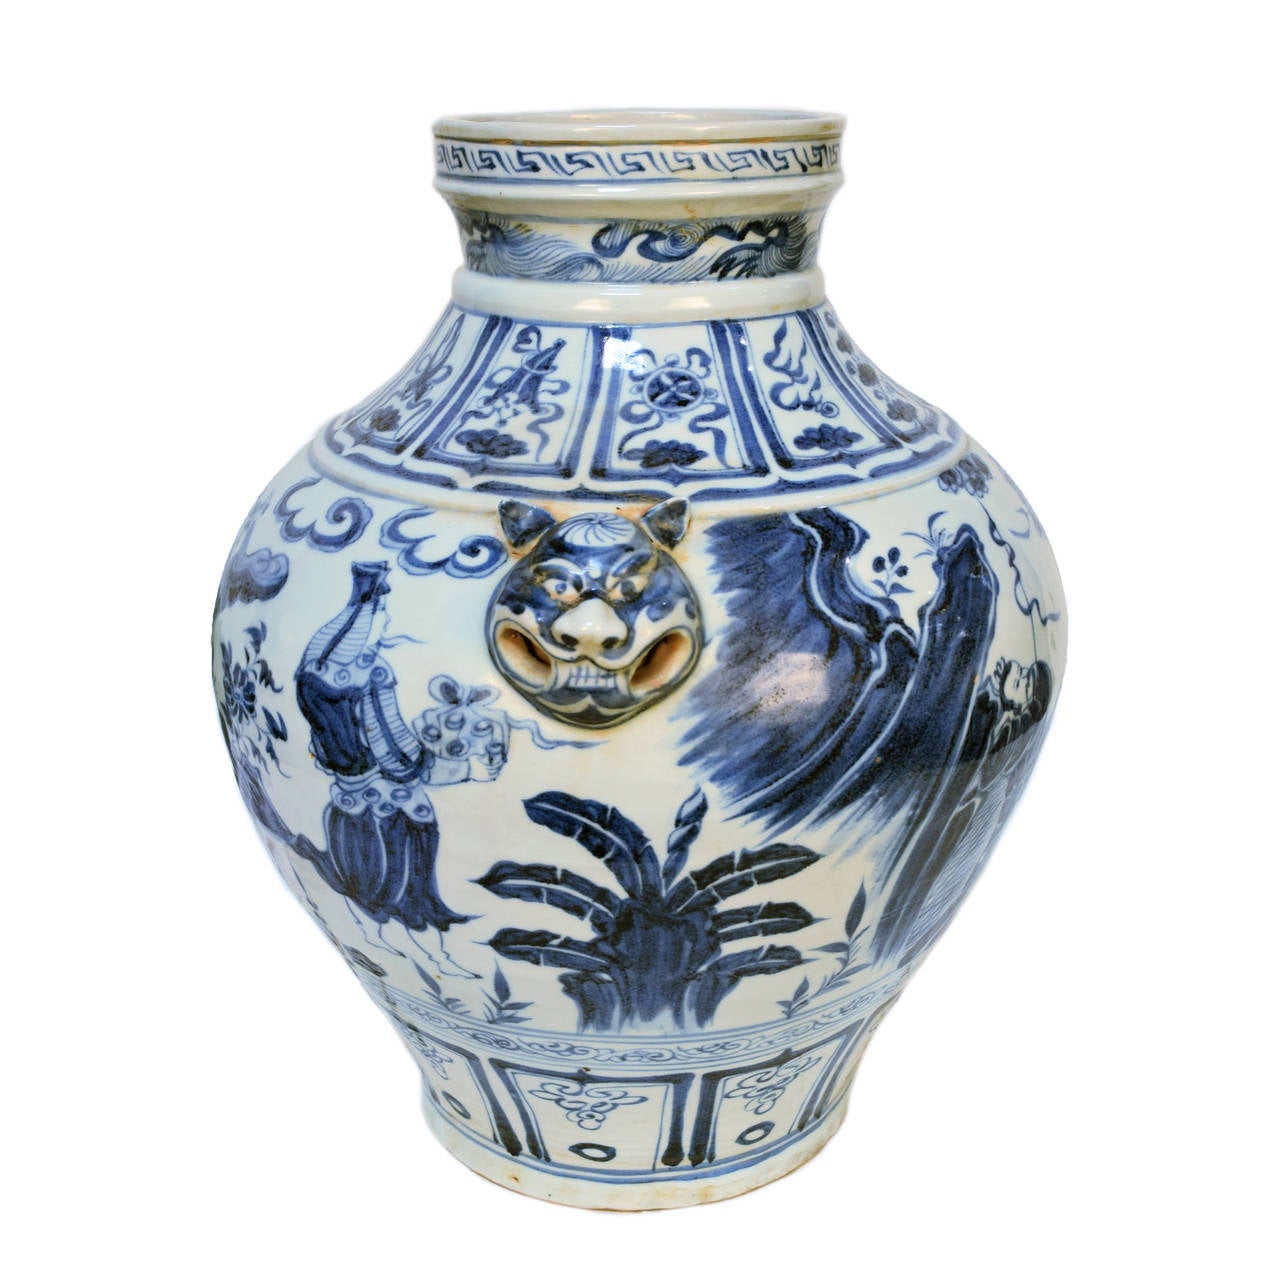 Blue and White painted porcelain vase depicting scholar figures and botanical themes with usual animal head handles.